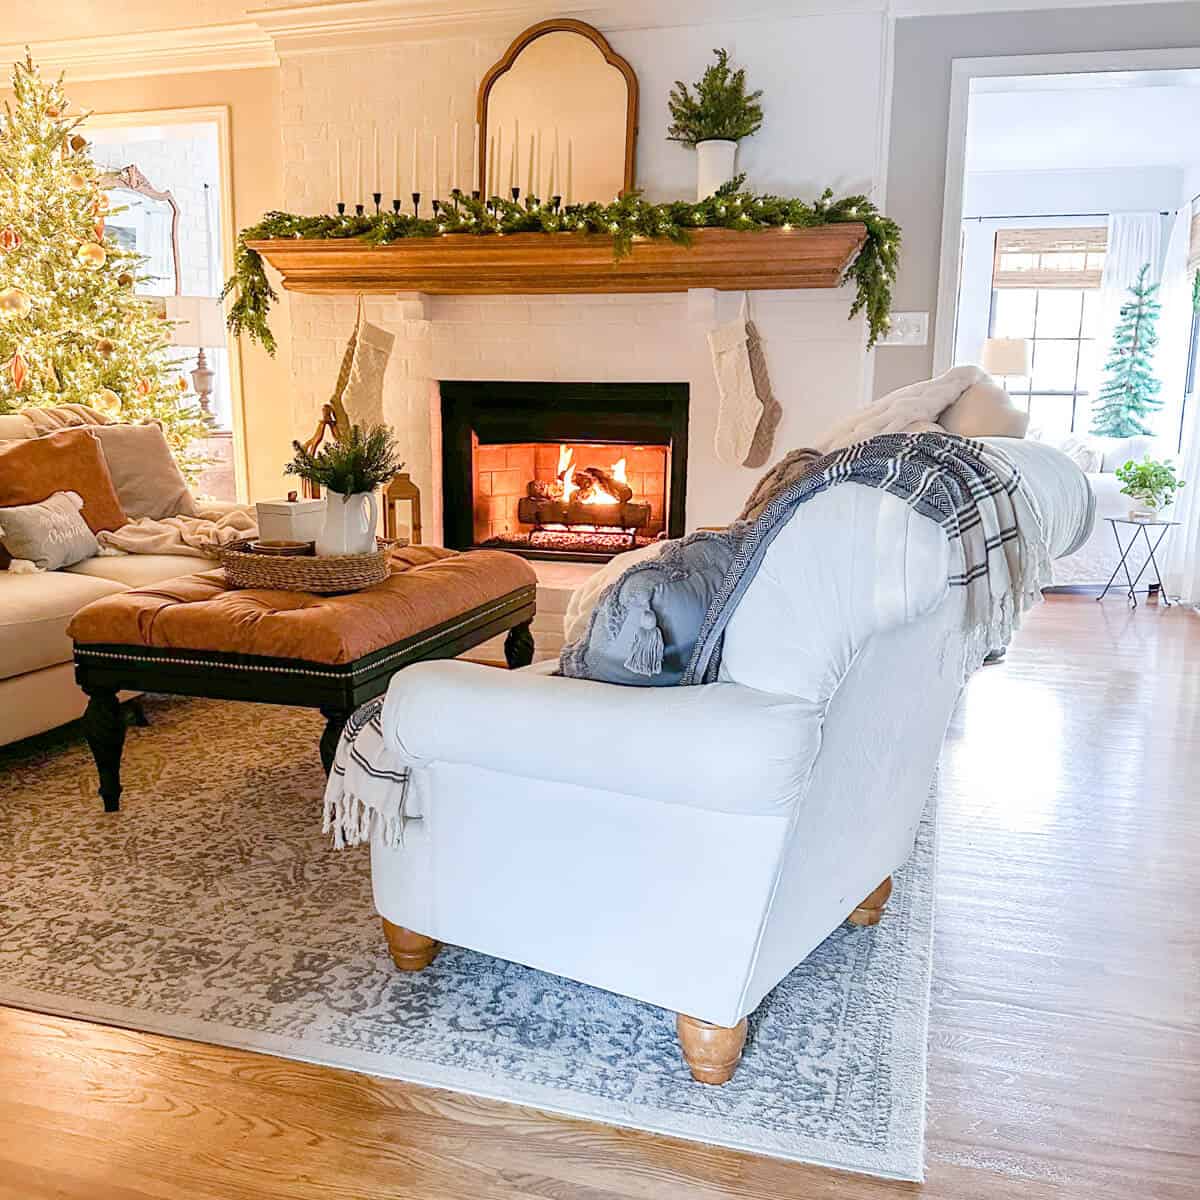 View of holiday fireplace with stocking and lit christmas tree